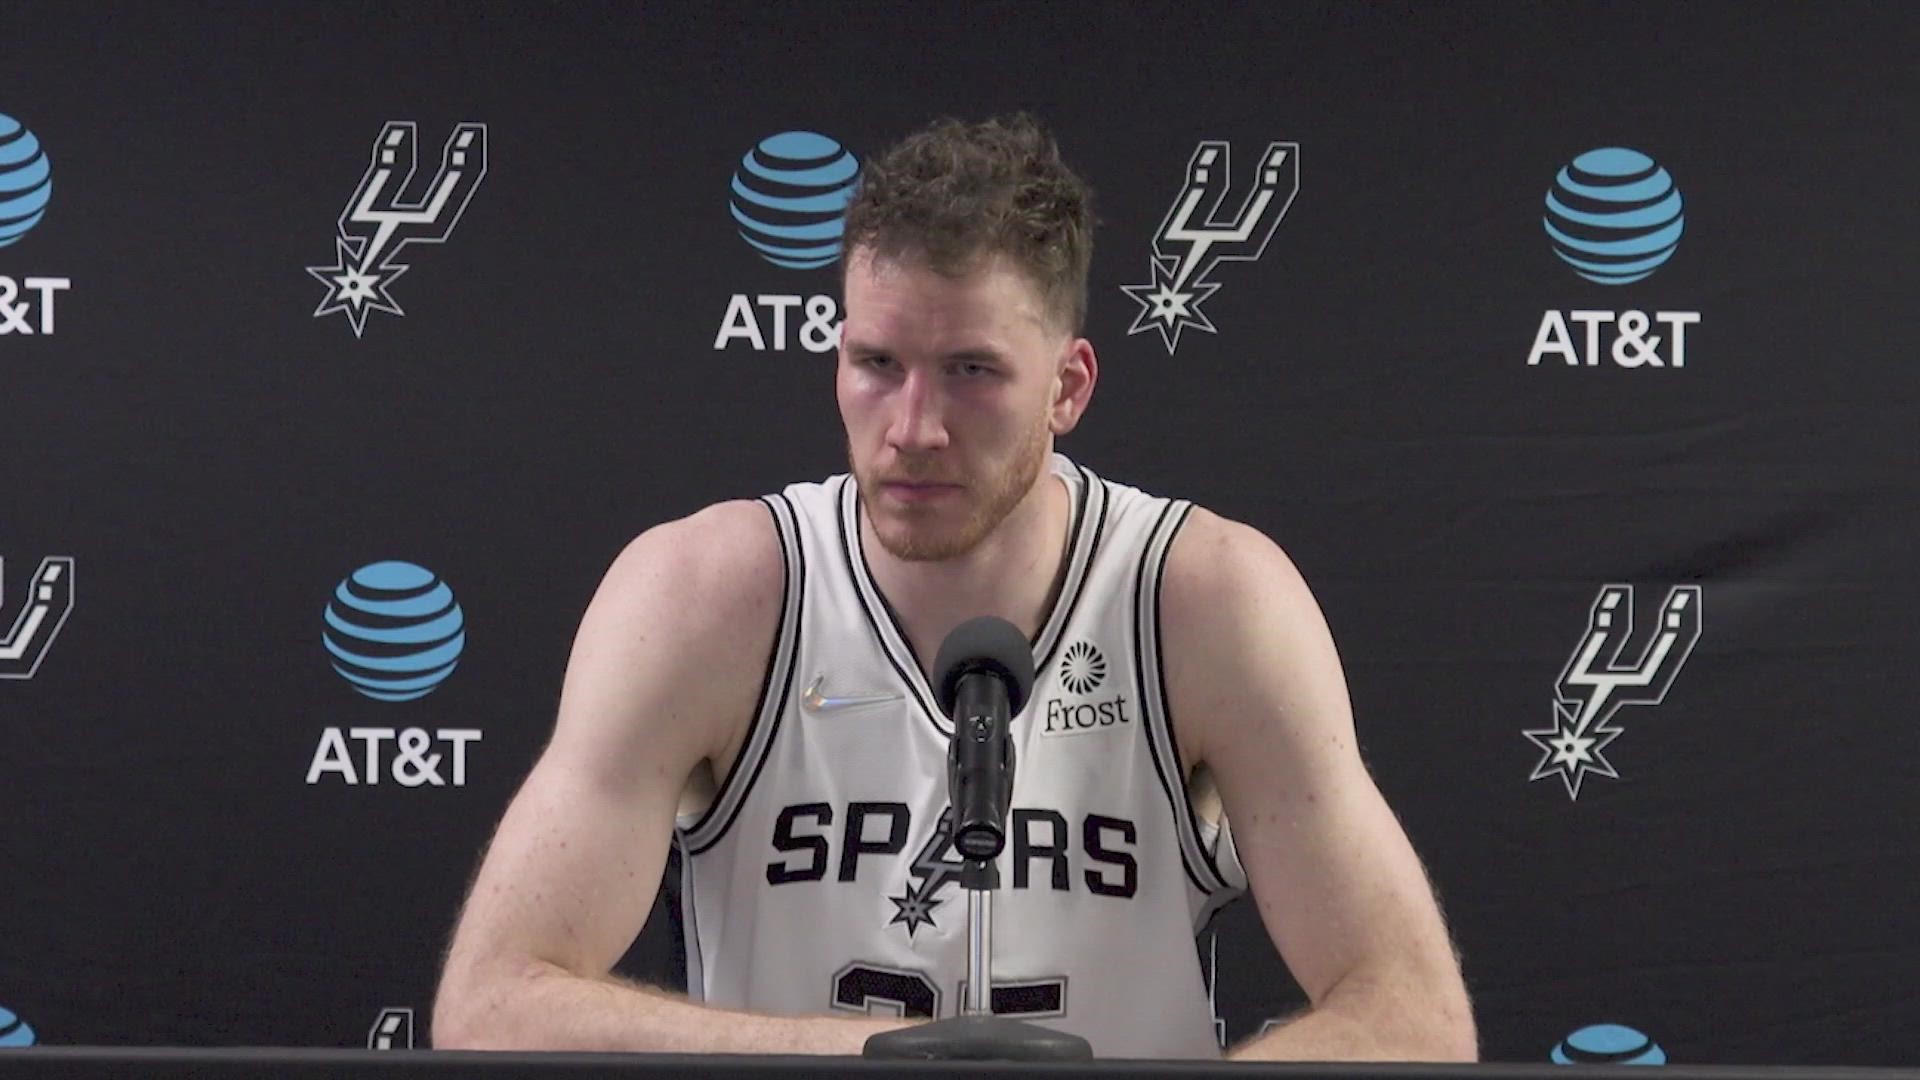 "I try to do a lot of the little things for the team. I try to be a back anchor on defense. I try to crash offensively every chance that I get," the big man said.